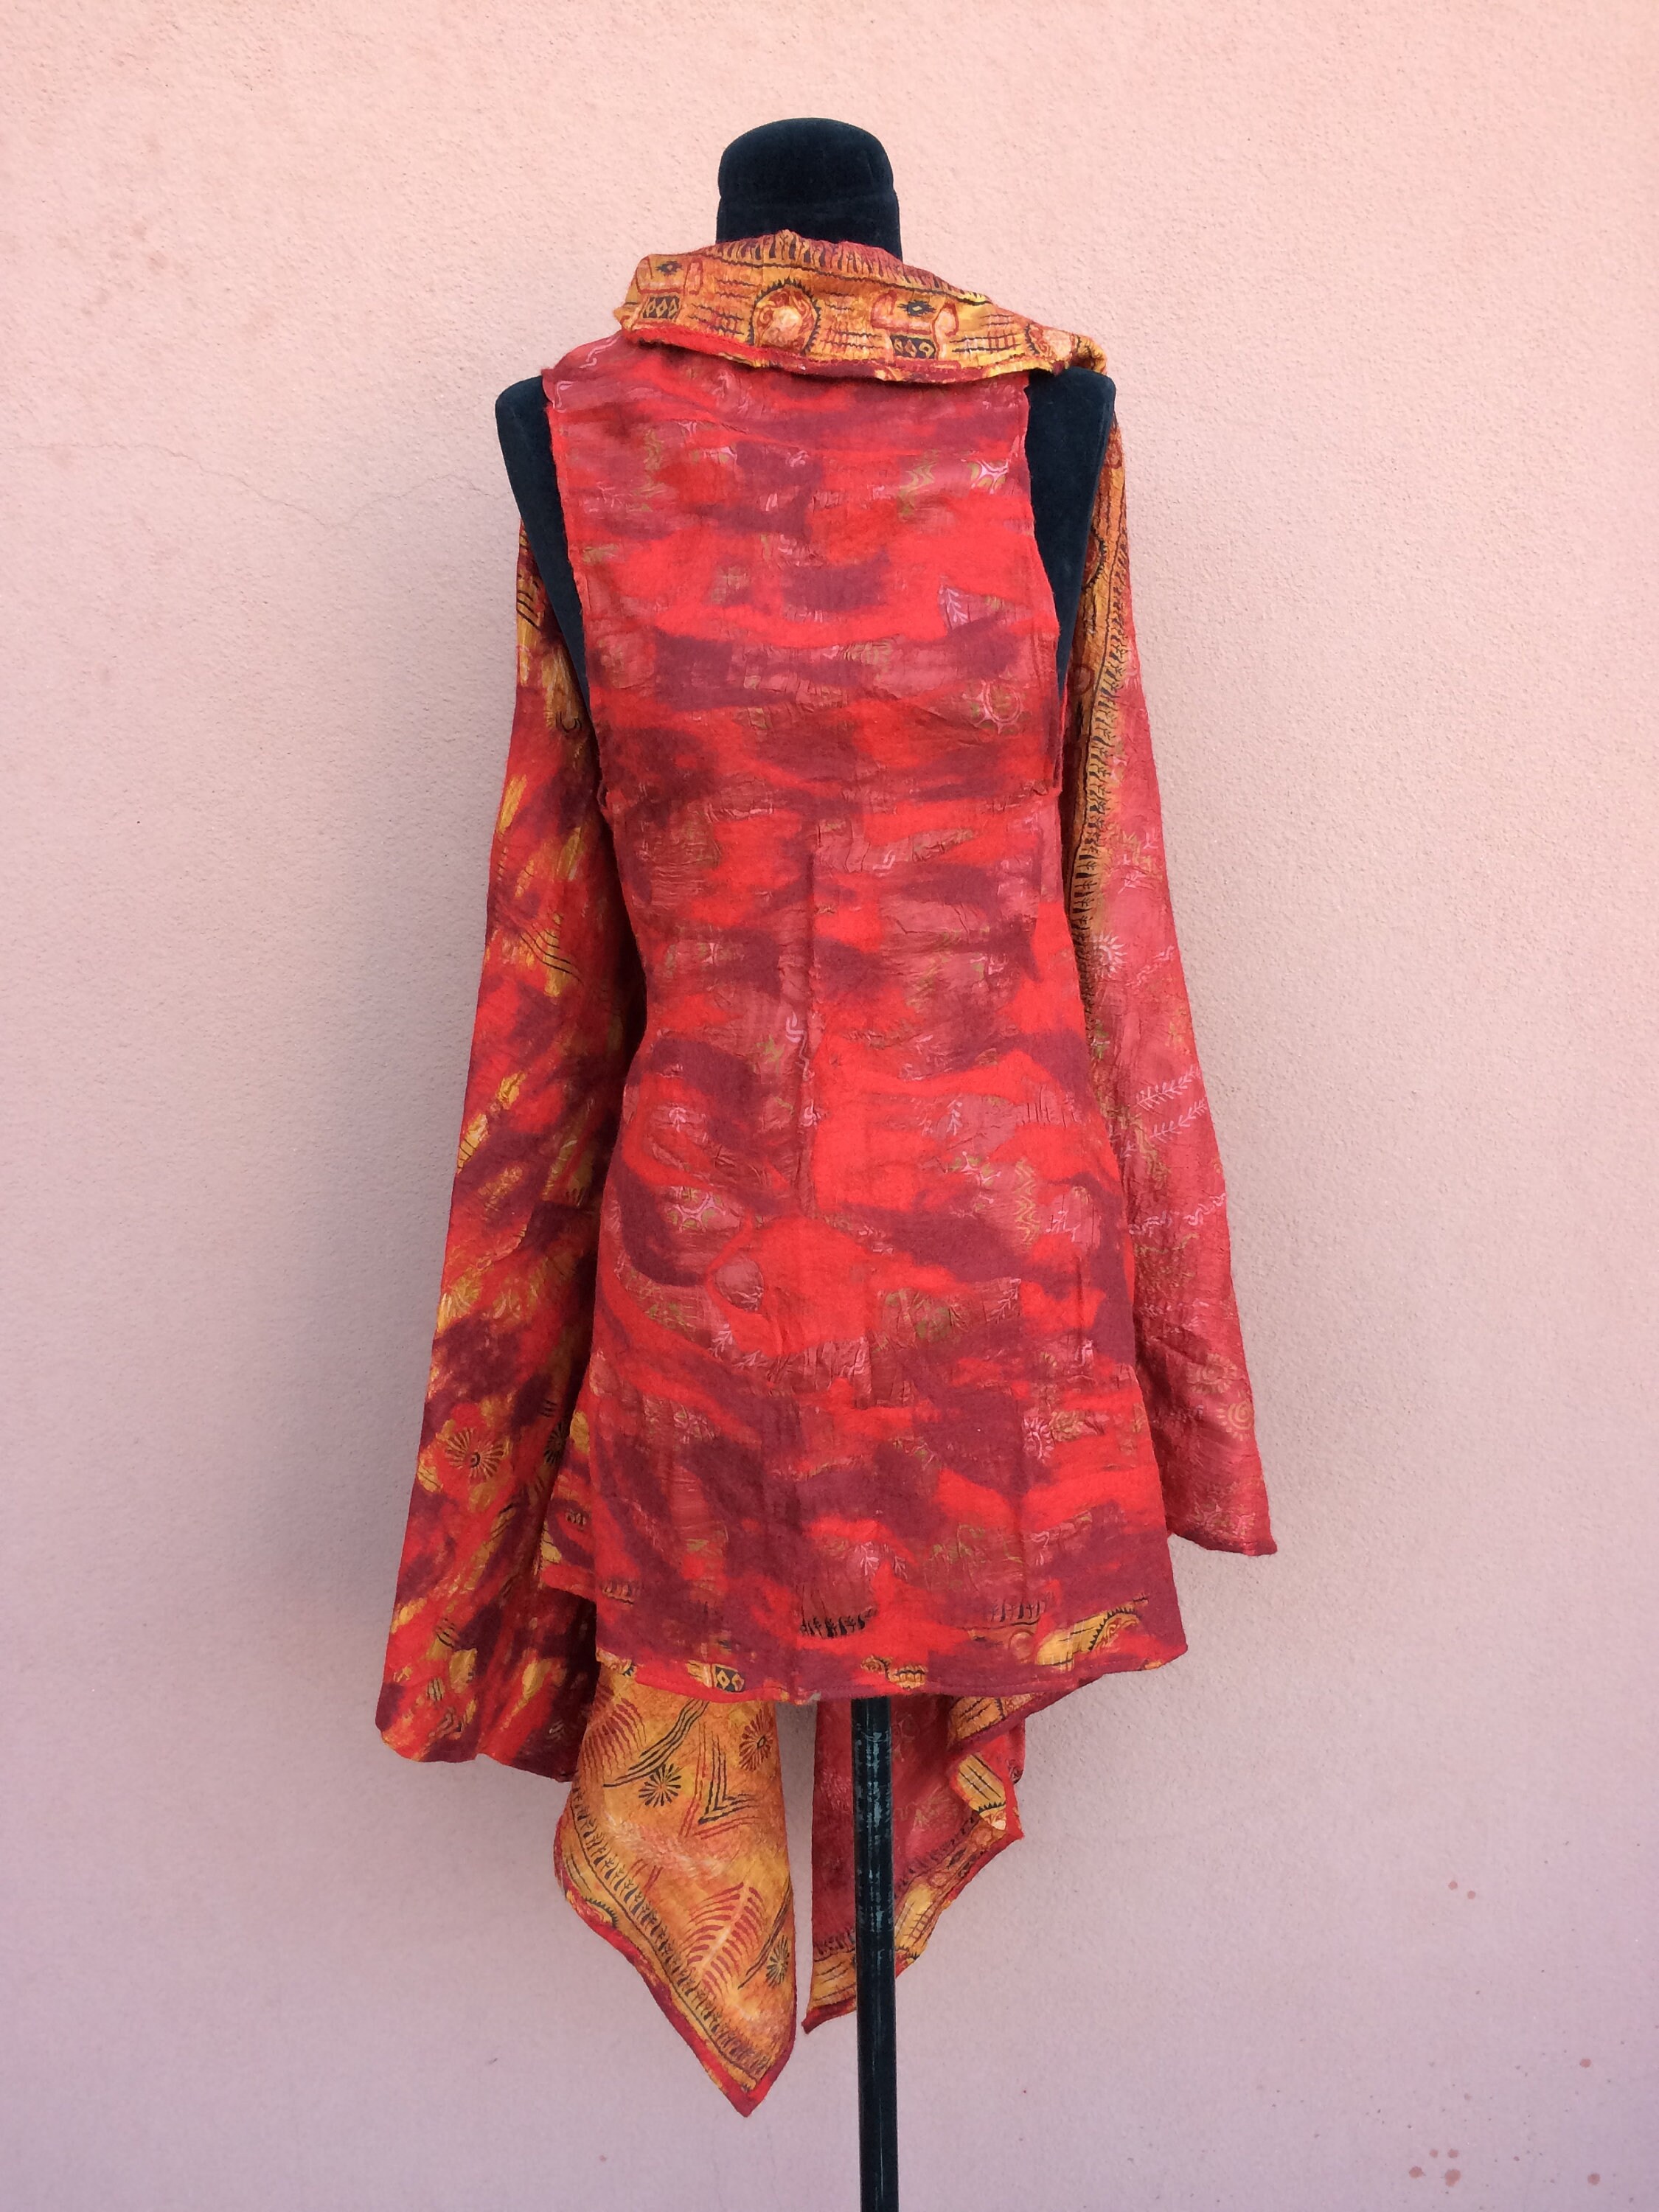 Kooloo Wool Silk Blend Women's Collective Vest Shawl Cover Hand Made Reversible Red Gold Black Lightweight Semi Sheer Nepal Fits Most